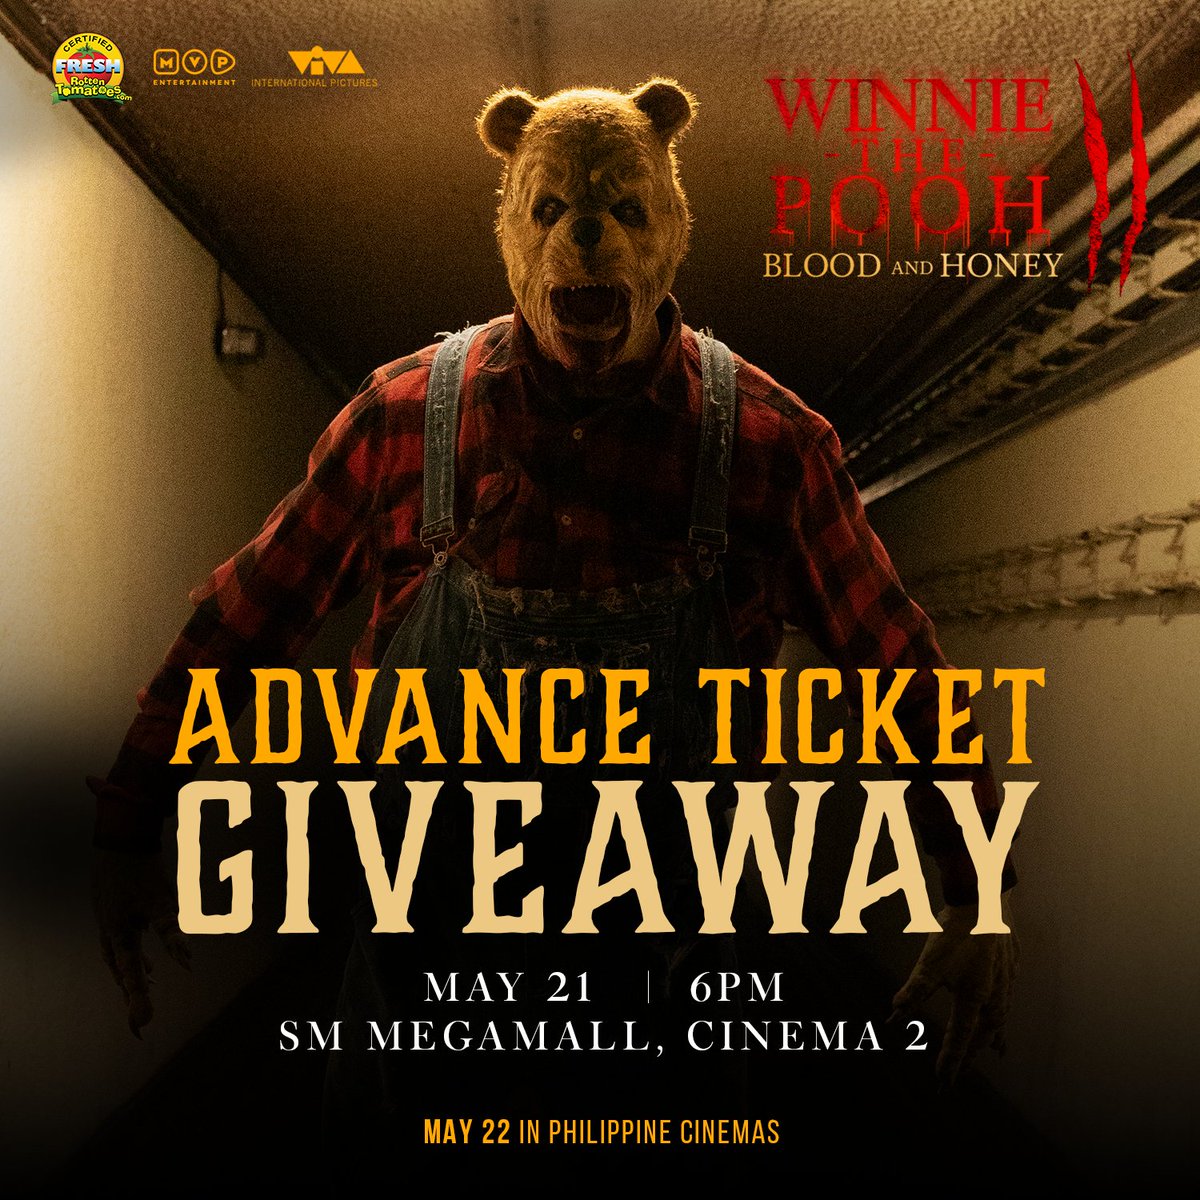 'WINNIE THE POOH: BLOOD AND HONEY 2' Advance Screening Ticket Giveaway! How to join: - Like and share this post - Follow/like Viva International Pictures social media accounts - Tag a friend you'd like to watch 'WINNIE THE POOH: BLOOD AND HONEY 2' with